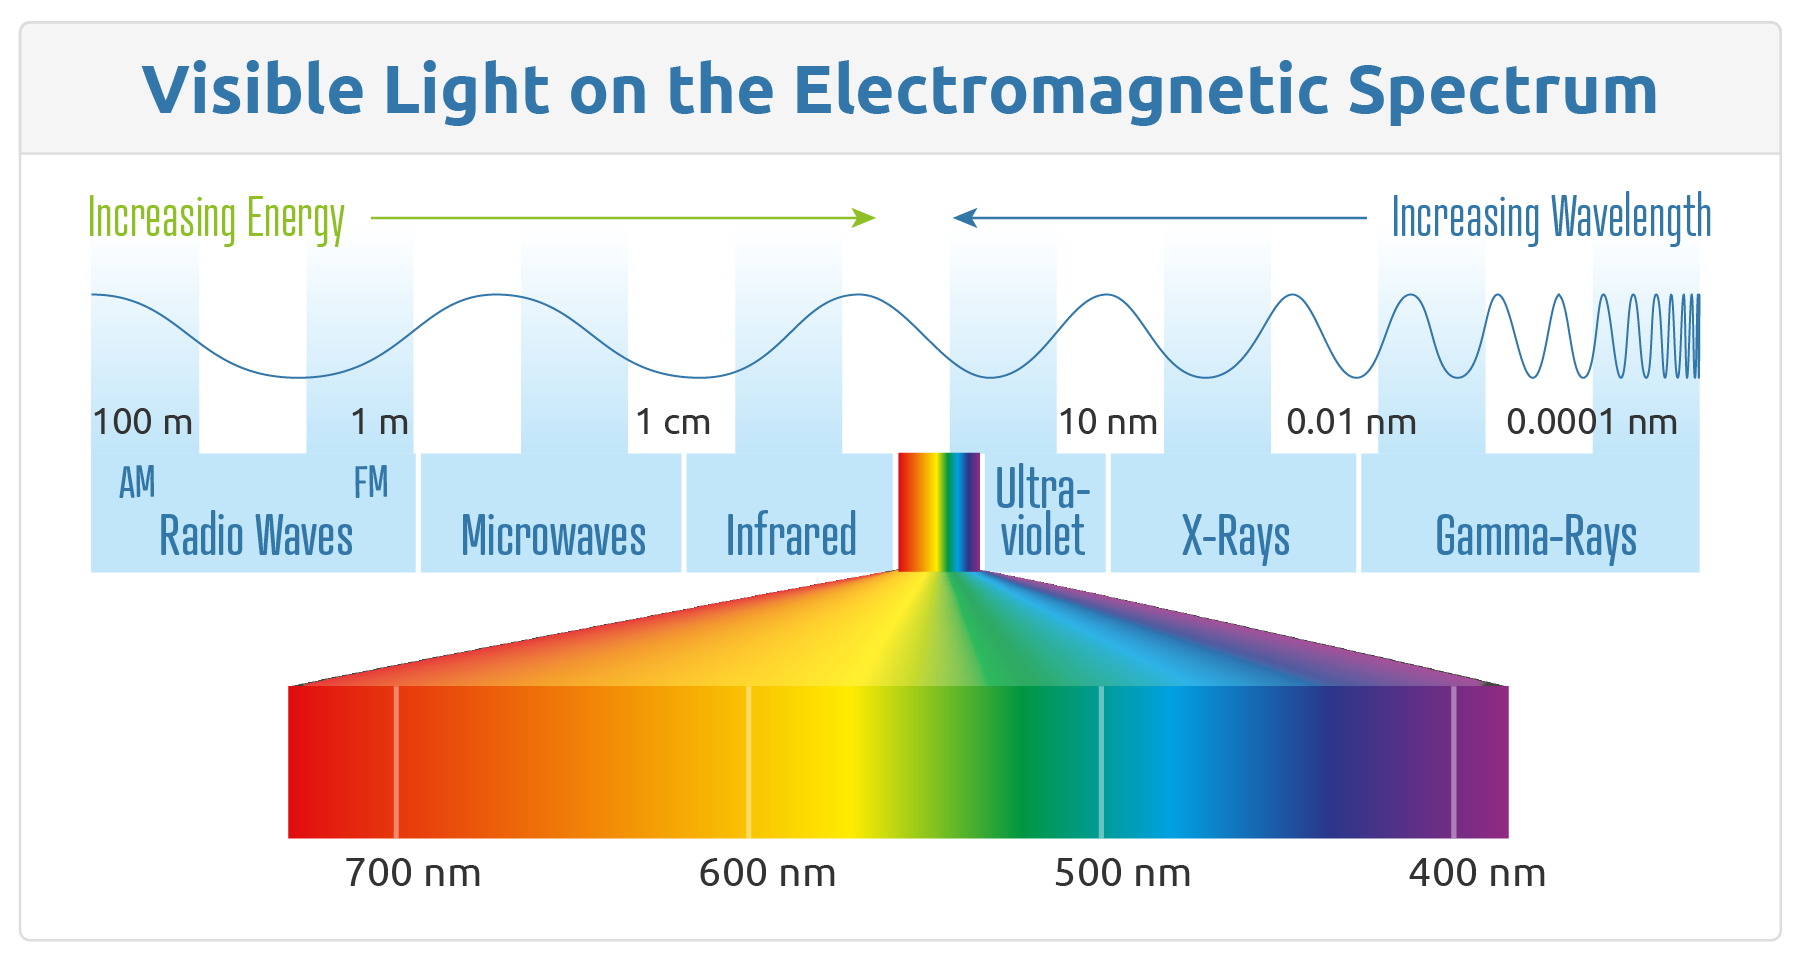 Visible light on the Electromagnetic Spectrum, showing how only a small portion is visible like colors in print or digital applications.